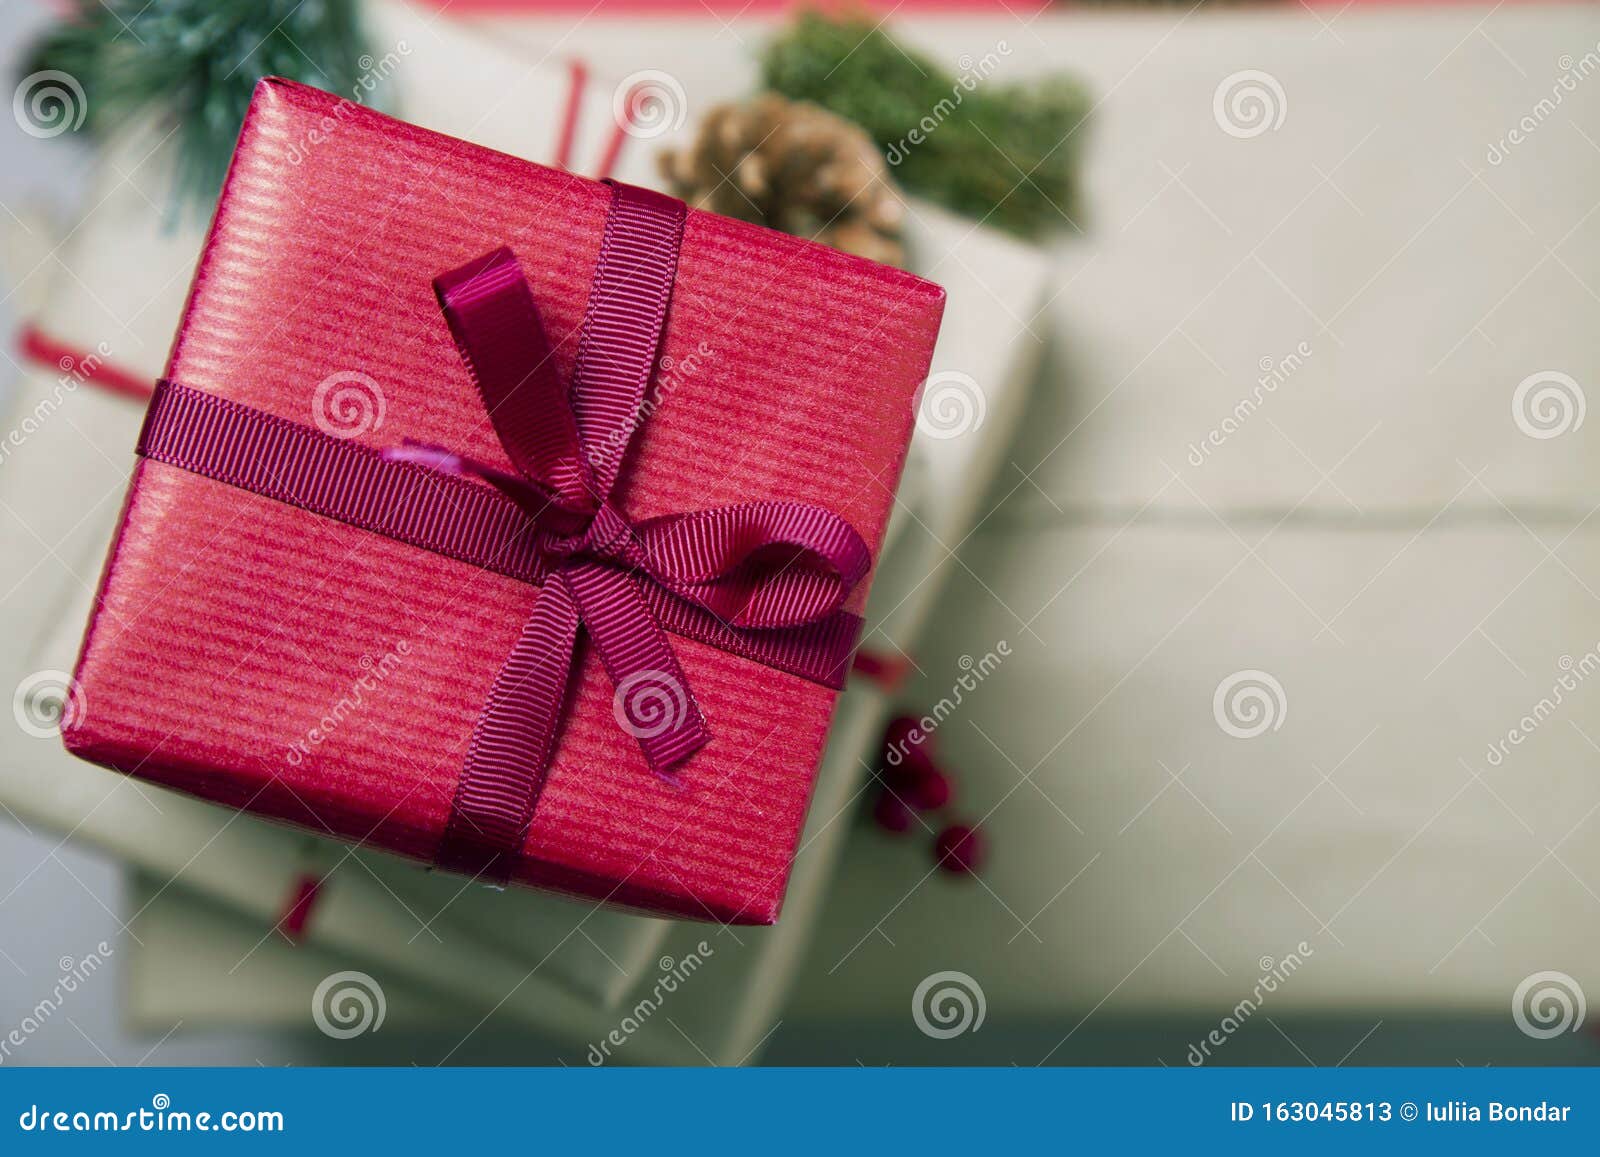 Plain Brown Paper Wrapped Christmas Presents Stock Image - Image of giving,  star: 113592615